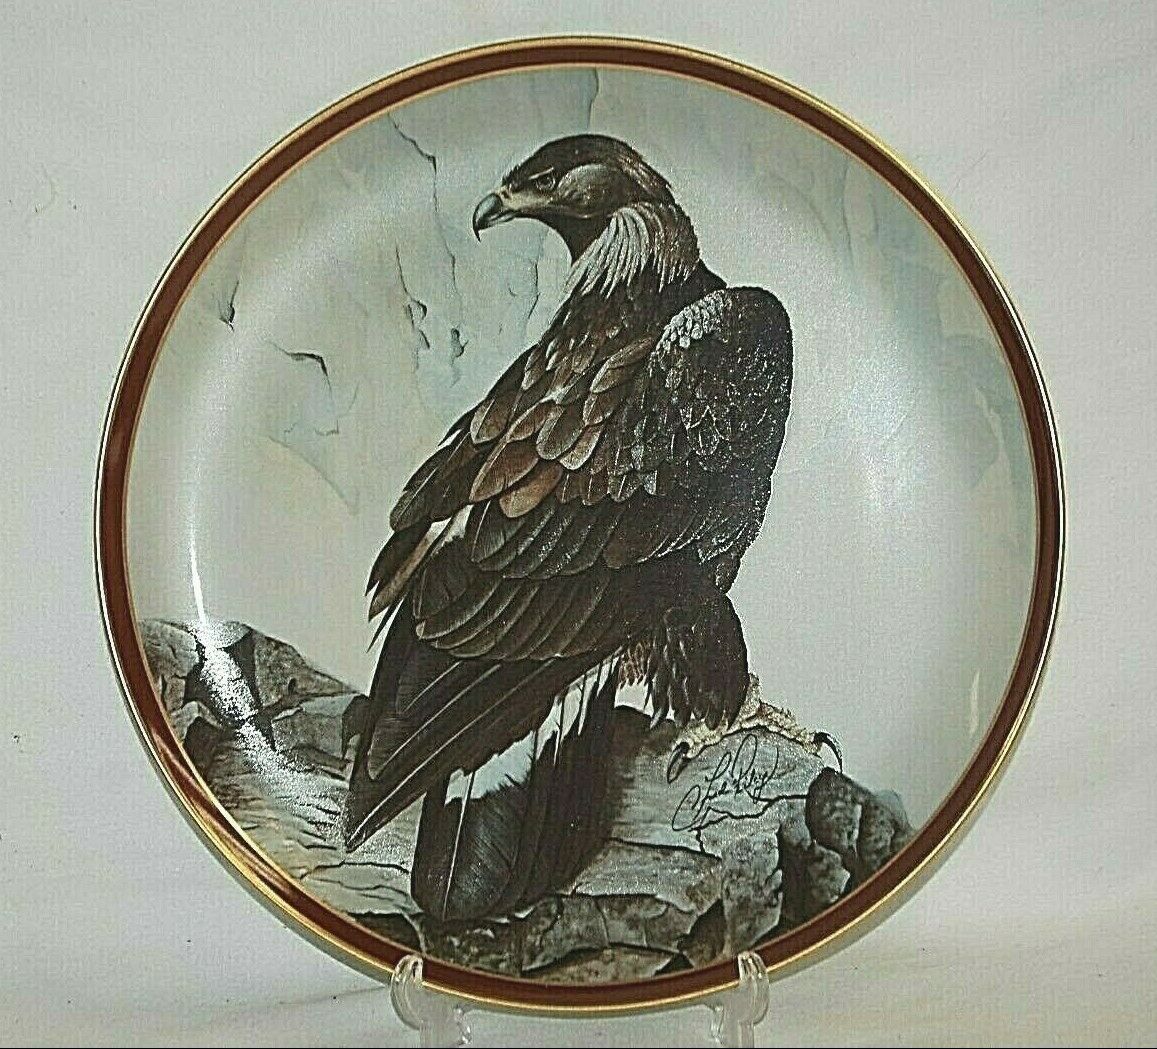 Primary image for Hamilton Collection Golden Eagle Plate Majestic Birds of Prey COA C. Ford Riley